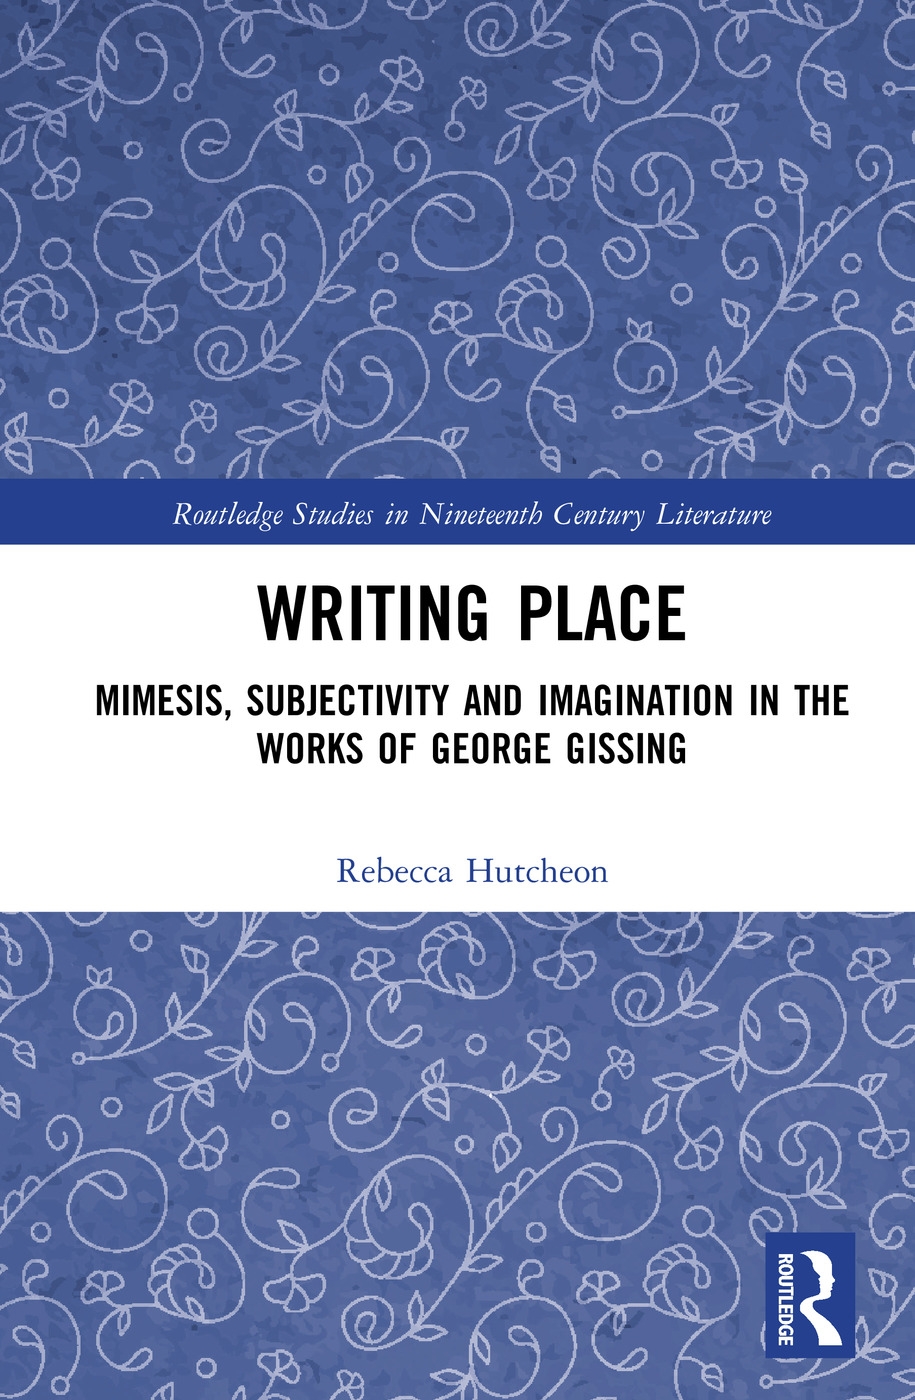 Writing Place: Mimesis, Subjectivity and Imagination in the Works of George Gissing